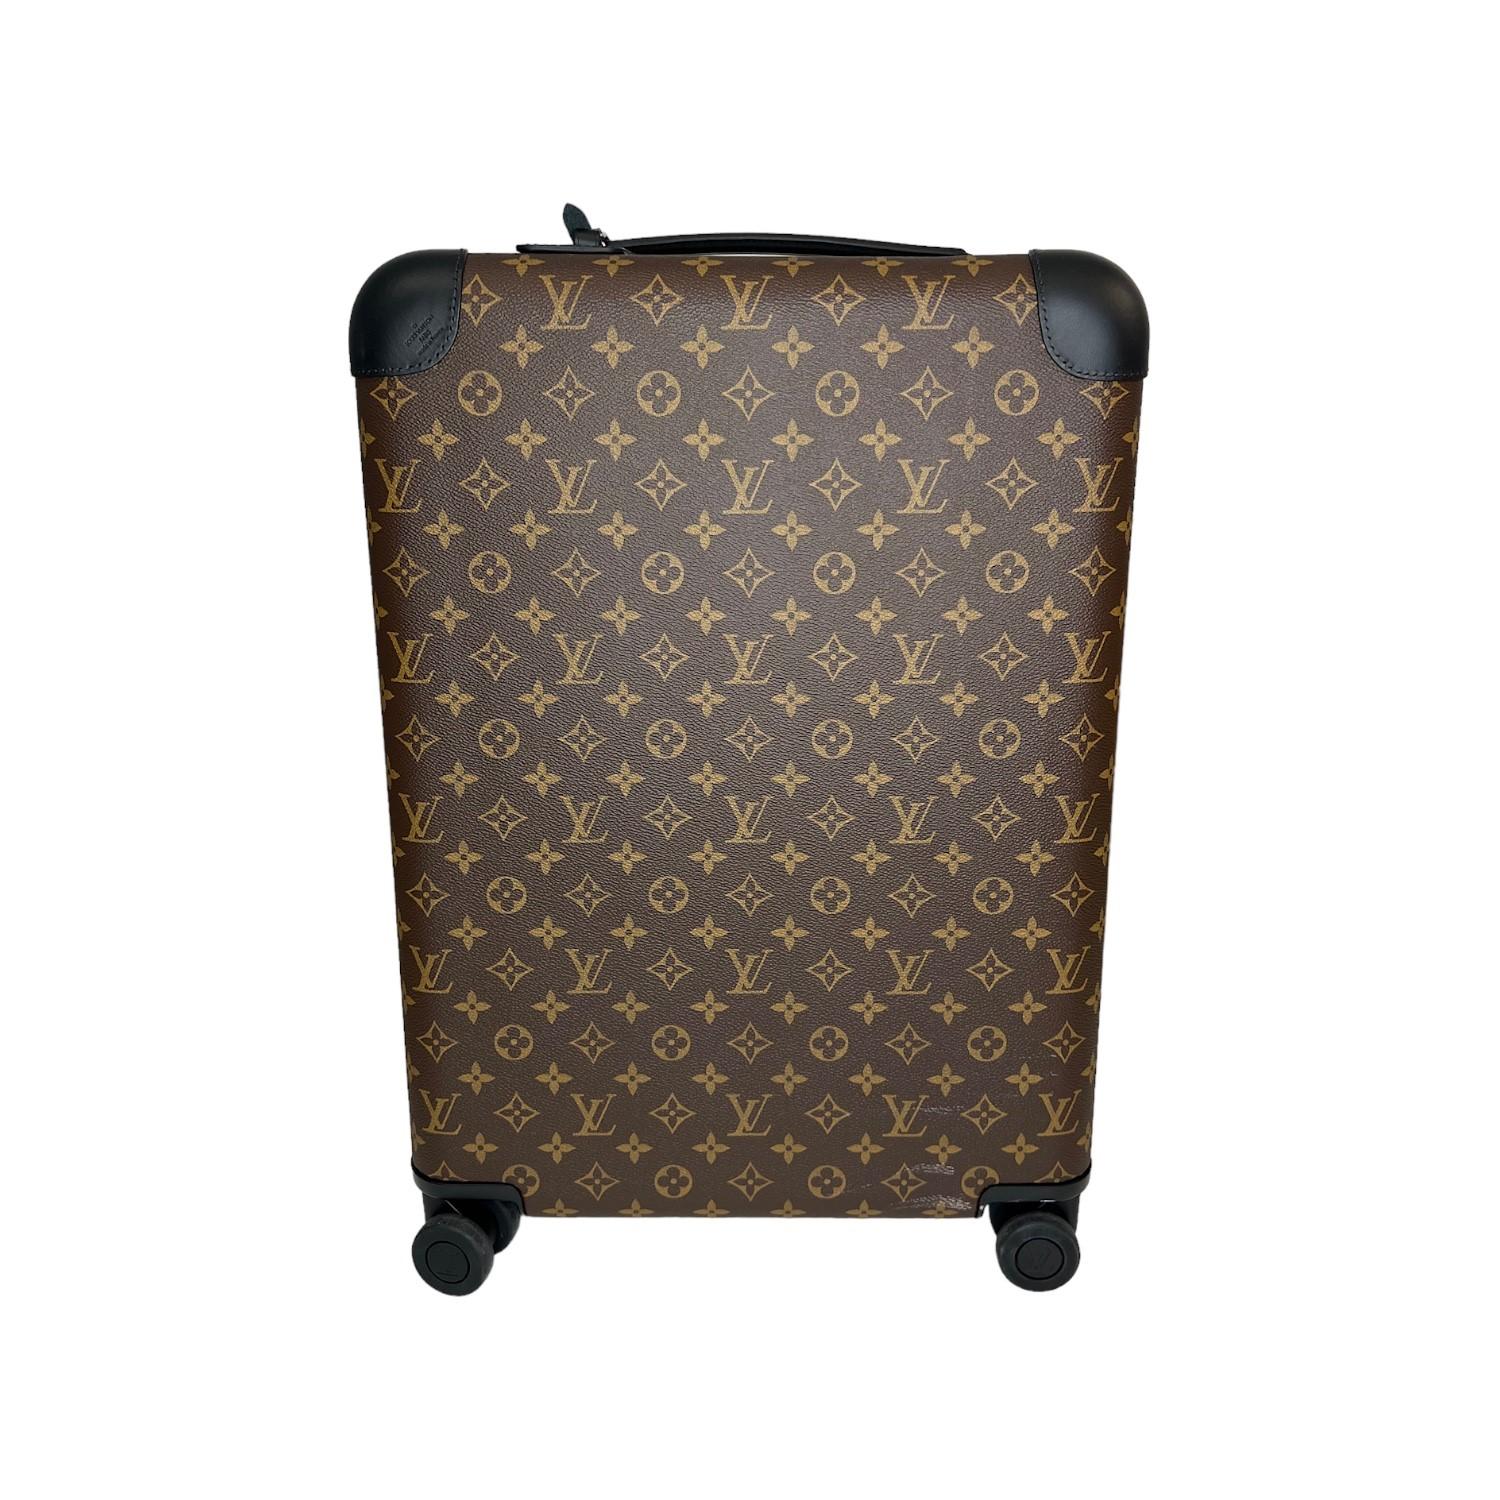 This Louis Vuitton Macassar Horizon 55 was made in France and it is finely crafted the classic Louis Vuitton Monogram coated canvas exterior with leather trimming and silver-tone hardware features. It has a locking zipper closure system that opens